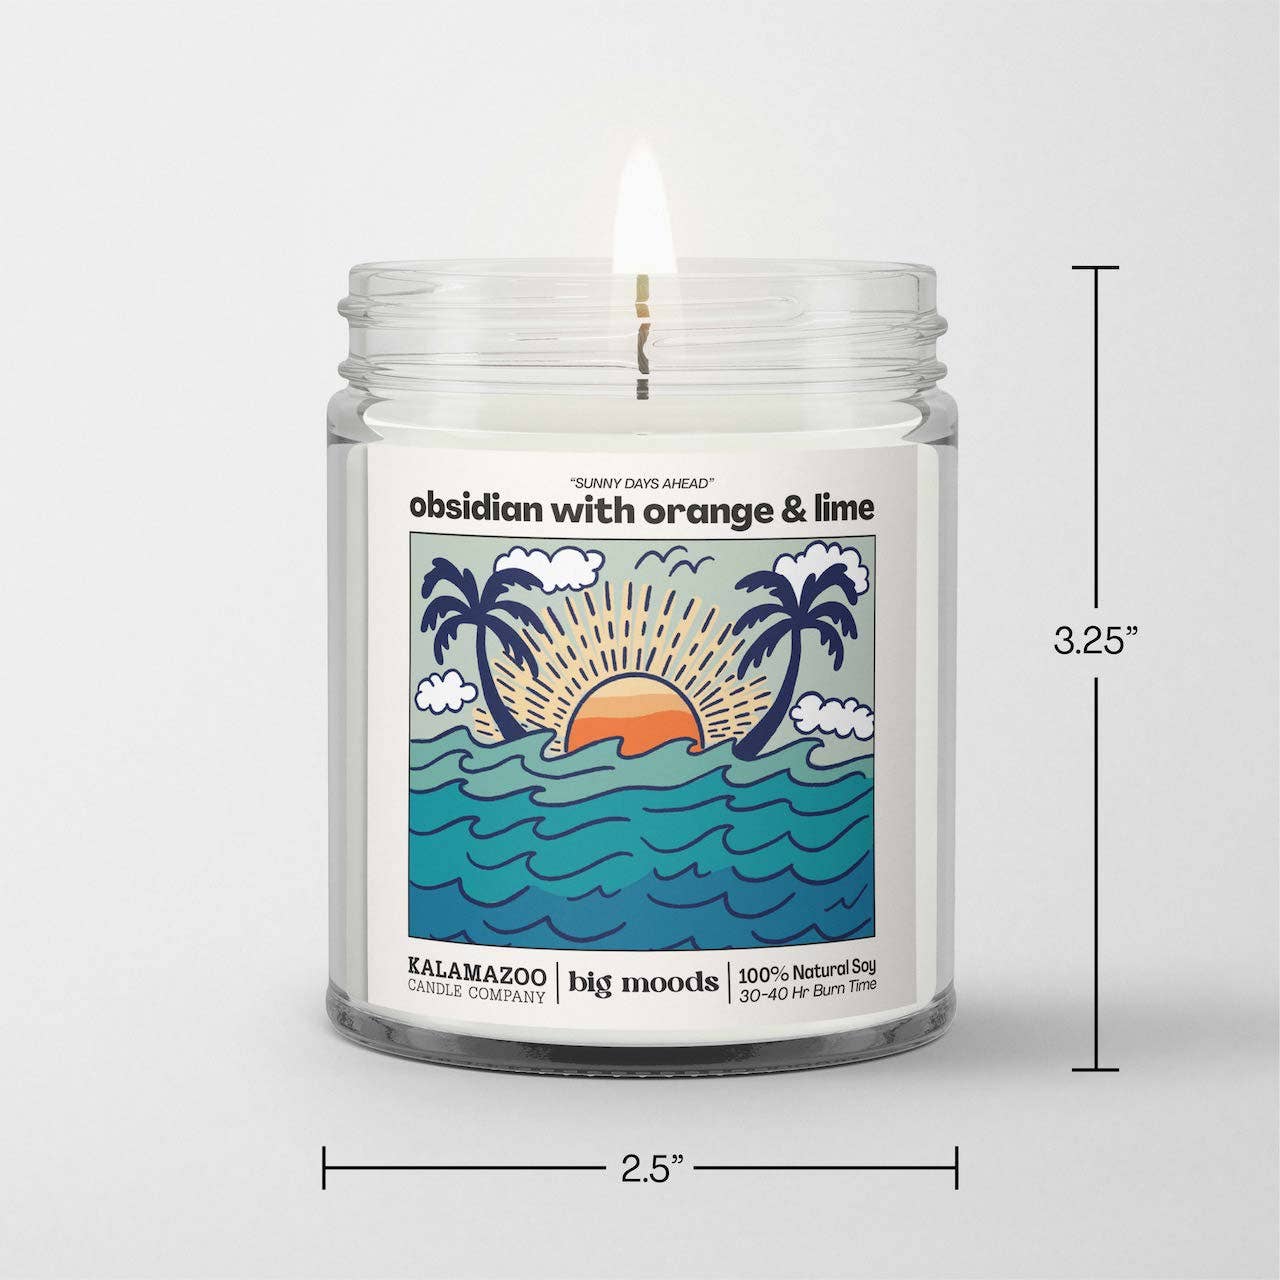 "Sunny Days Ahead" Obsidian with Orange & Lime - Soy Candle